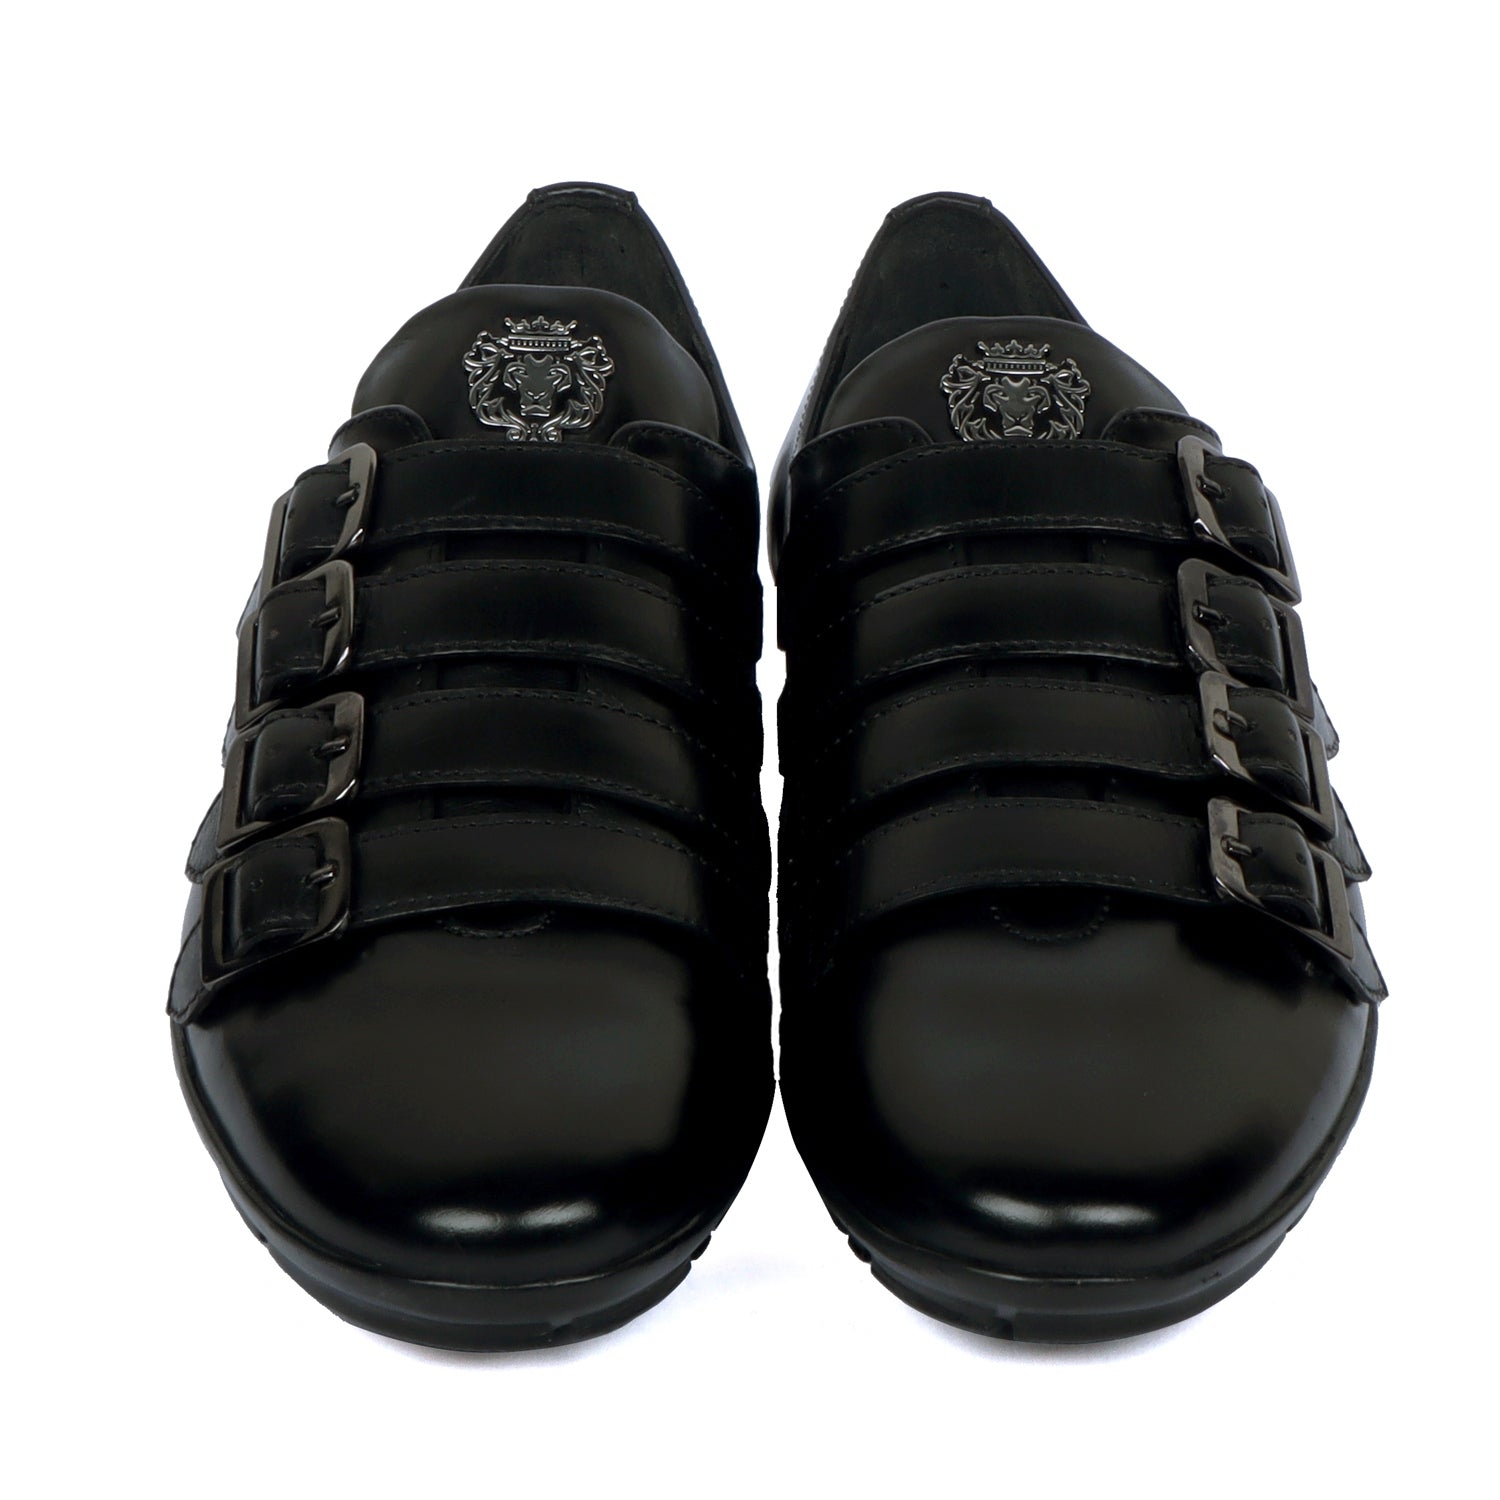 REBEL. Touch-Strap Sneakers Black | RBL